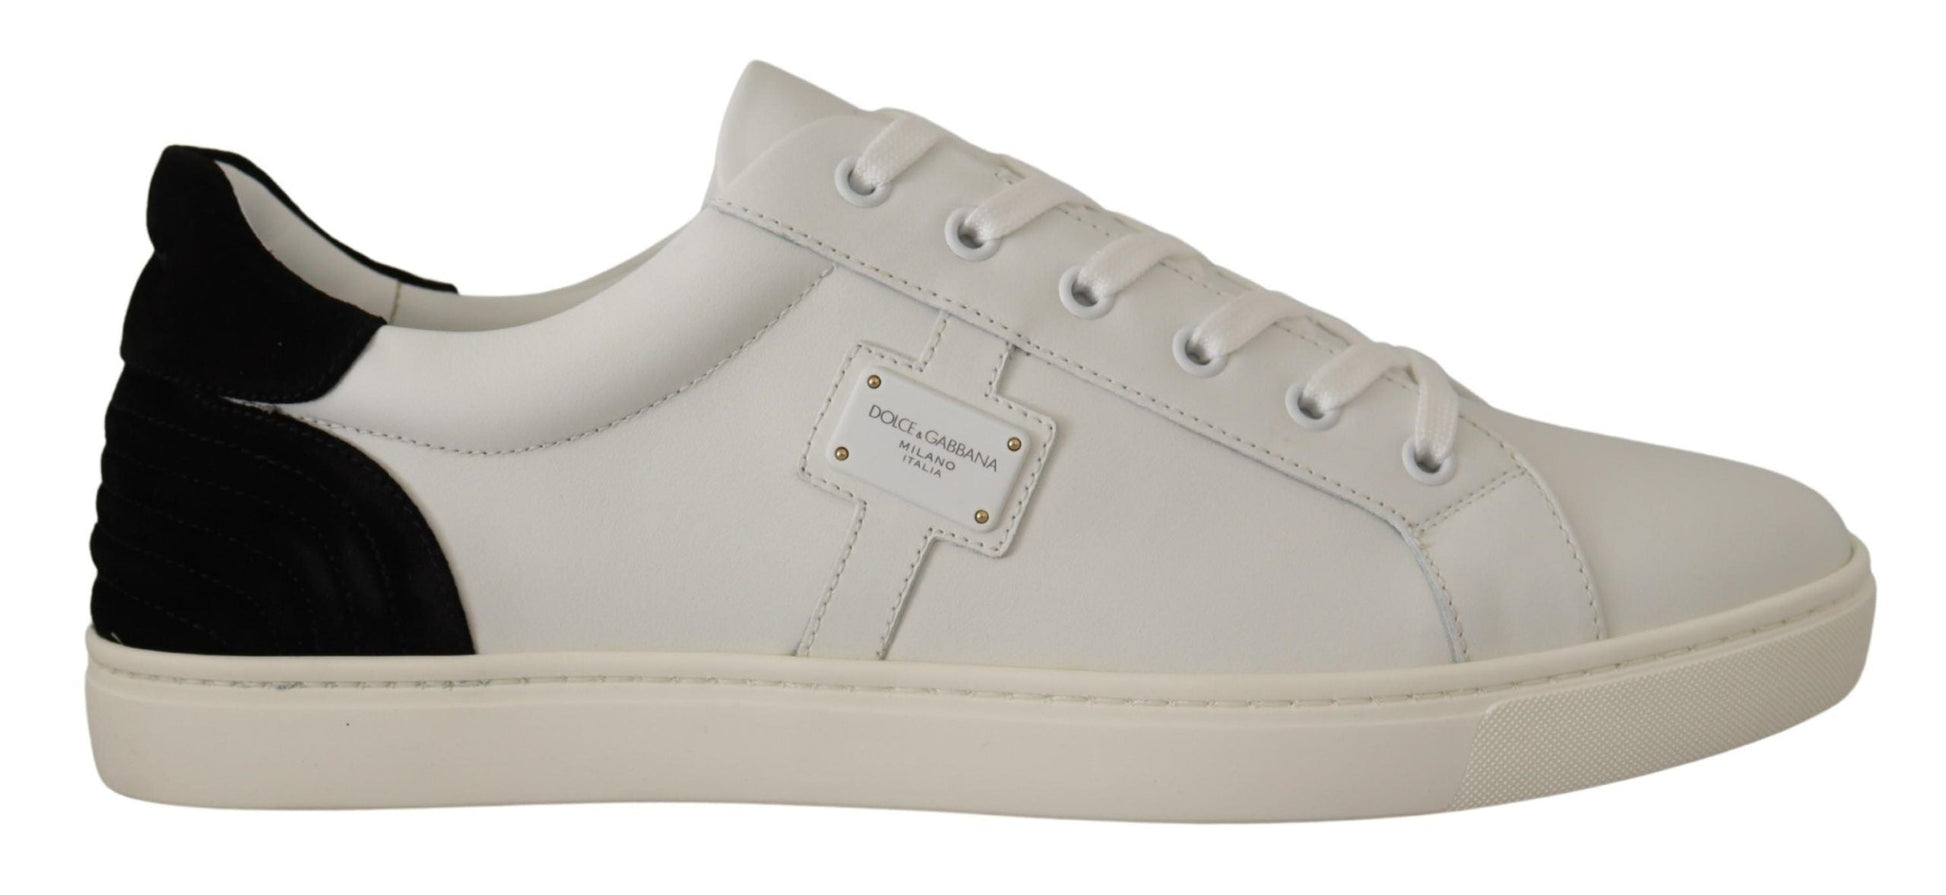 Dolce & Gabbana White Suede Leather Men Sneakers | Fashionsarah.com